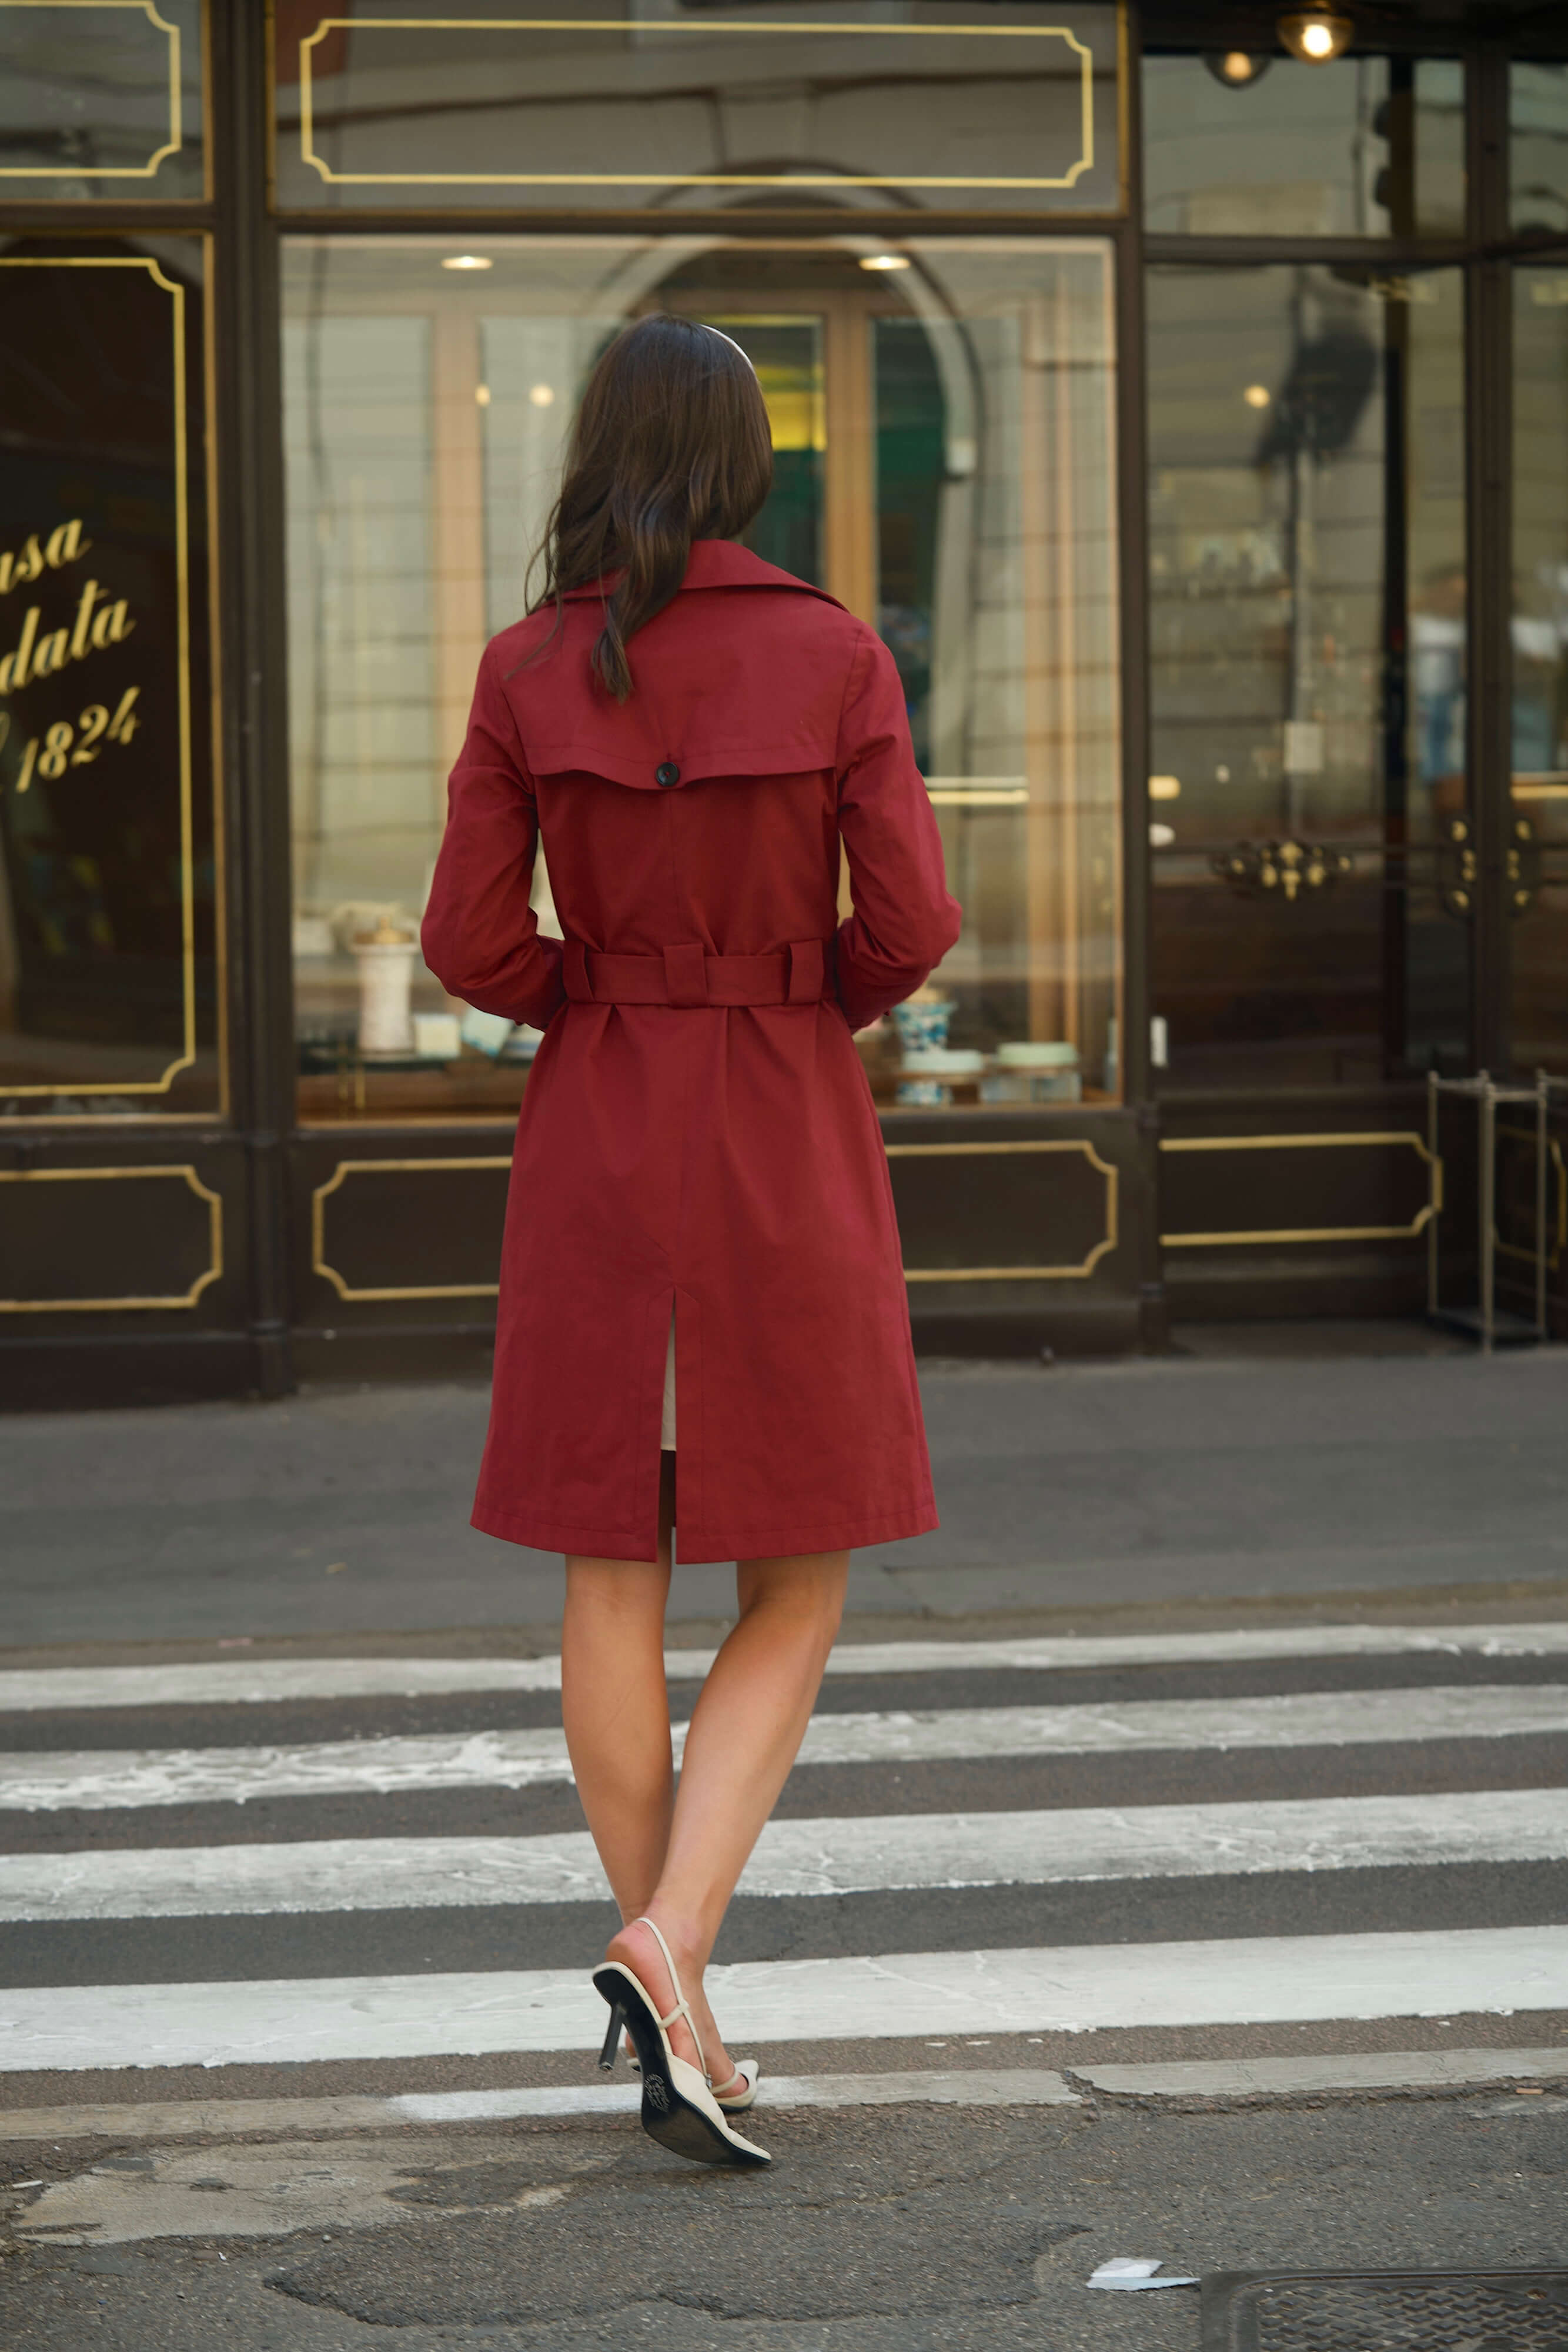 red trench coat  Red trench coat, Fashion, Coat